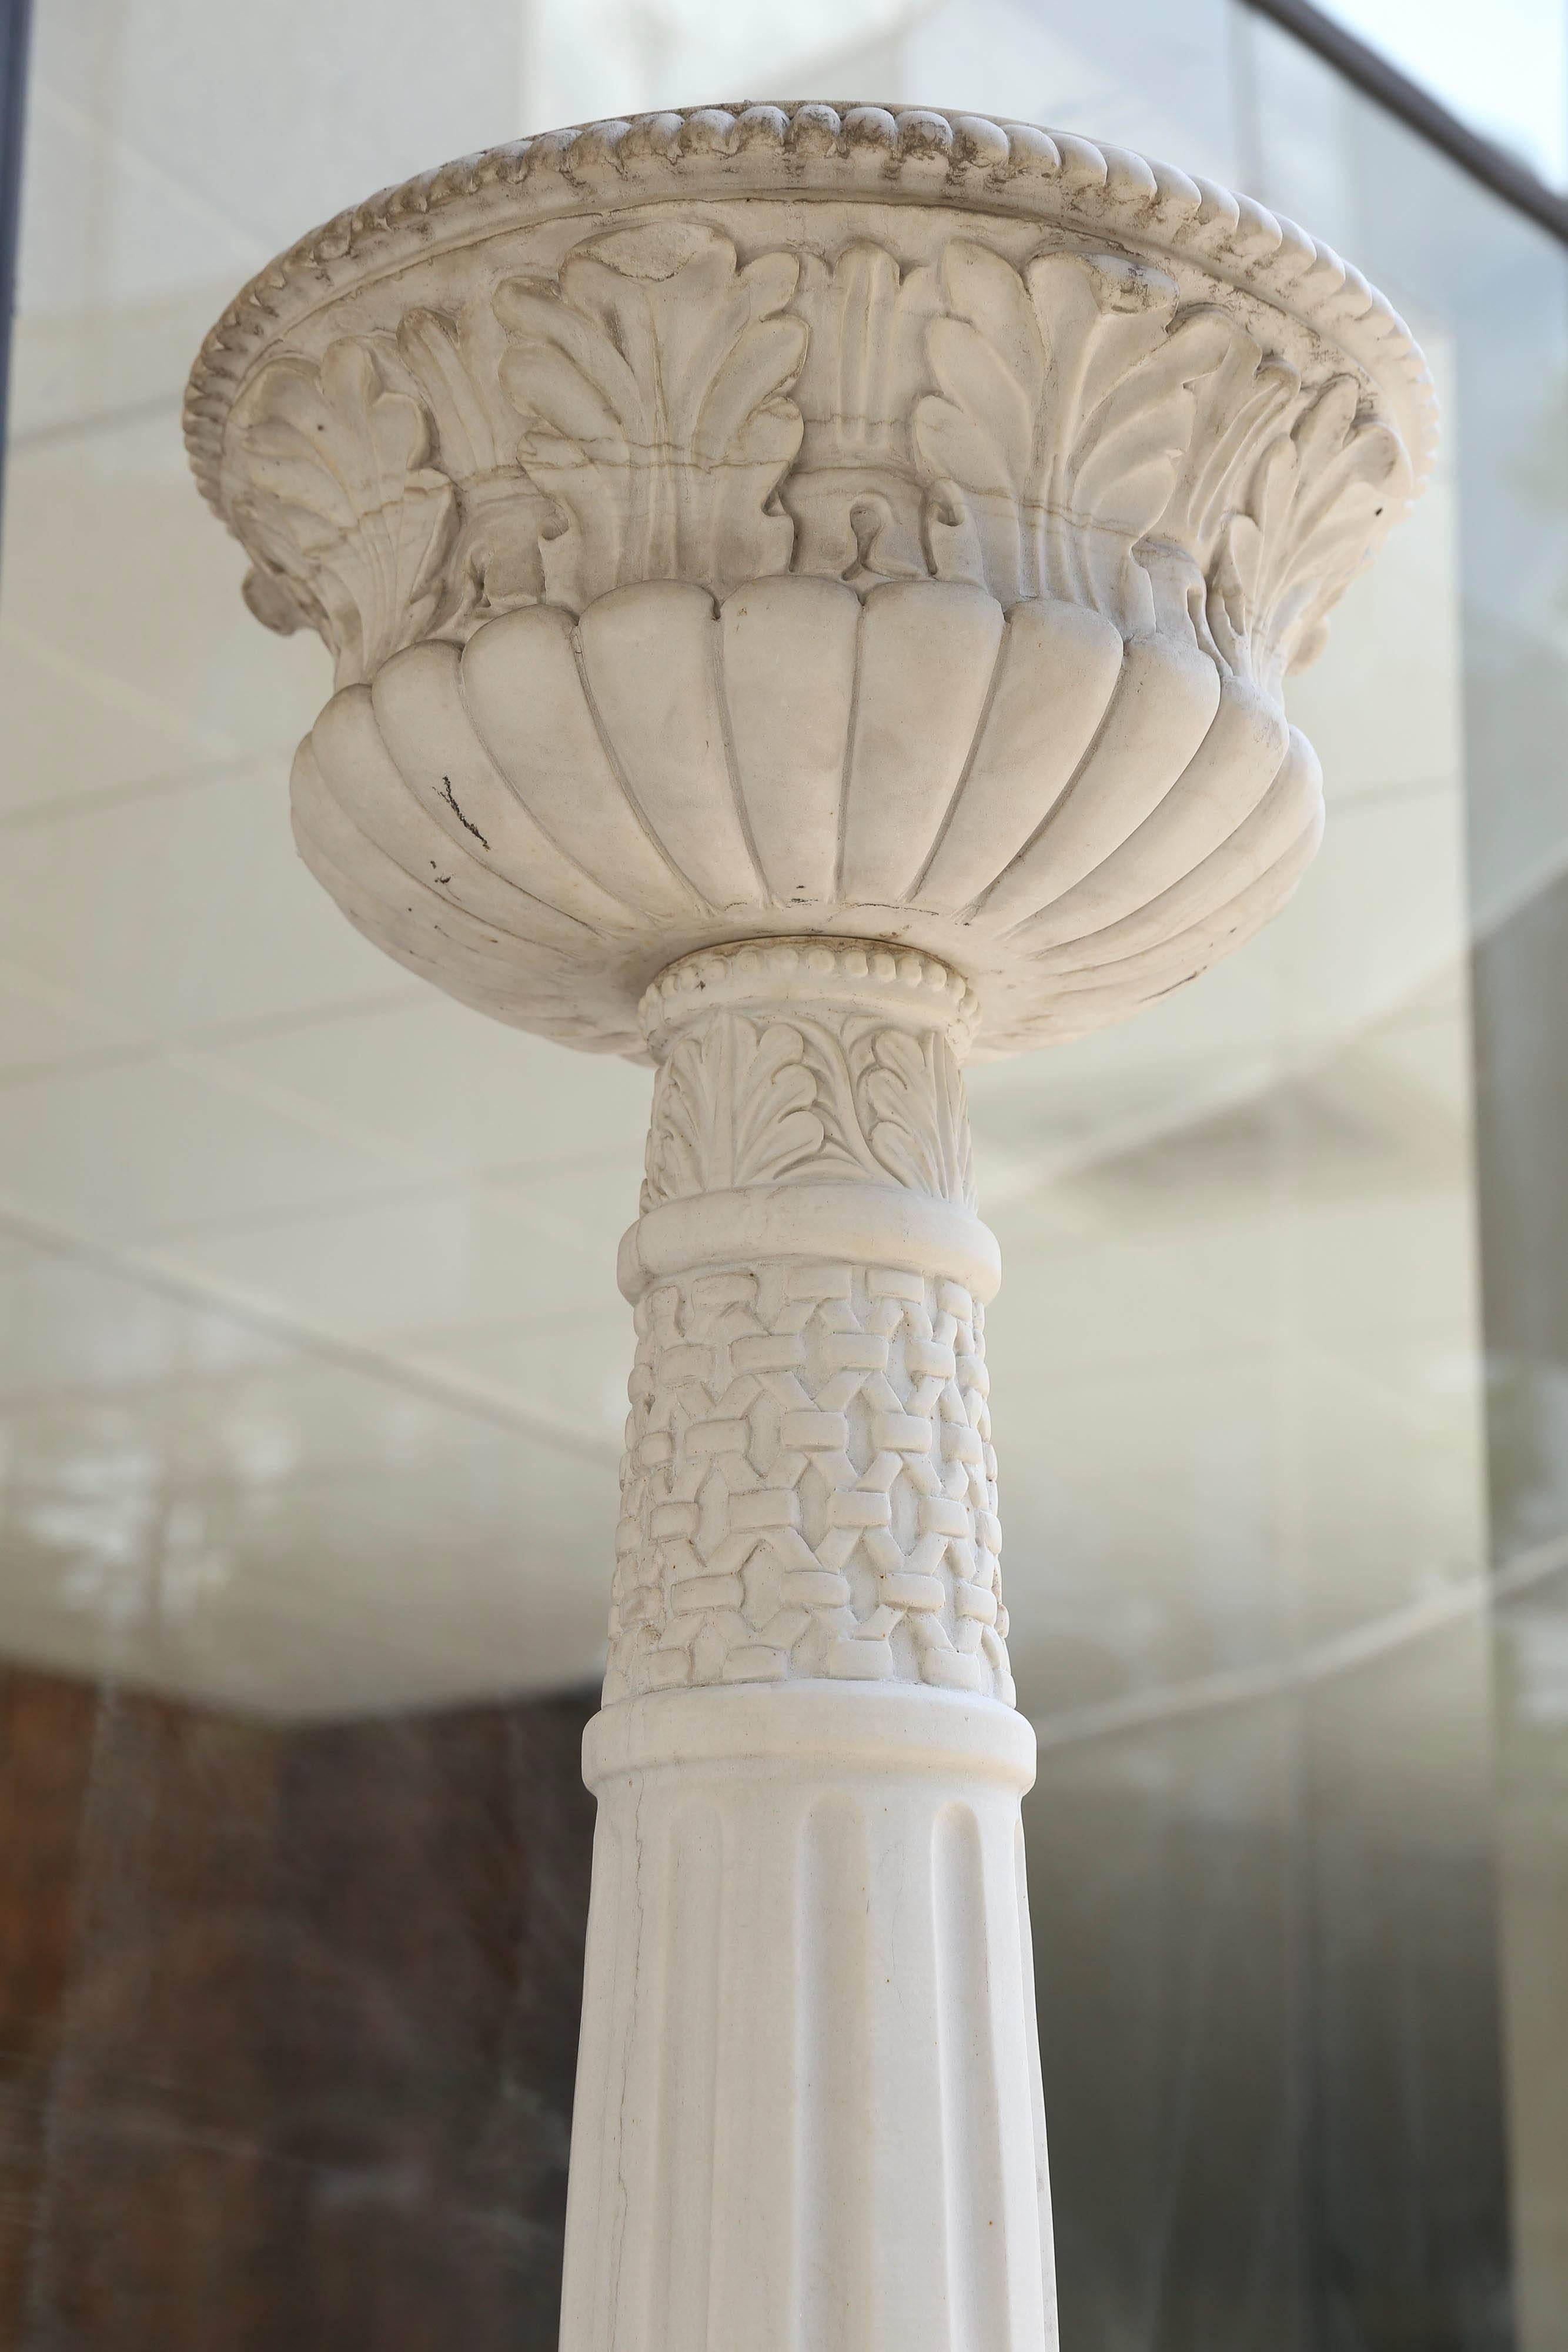 Tall and beautiful carved white marble torchiers. Carved rams heads
Decorate the corners of the bases. Scrolling embellishments are
Carved into all sides of this pair. Fluted columns support the top
Lantern that is also fluted and carved foliate